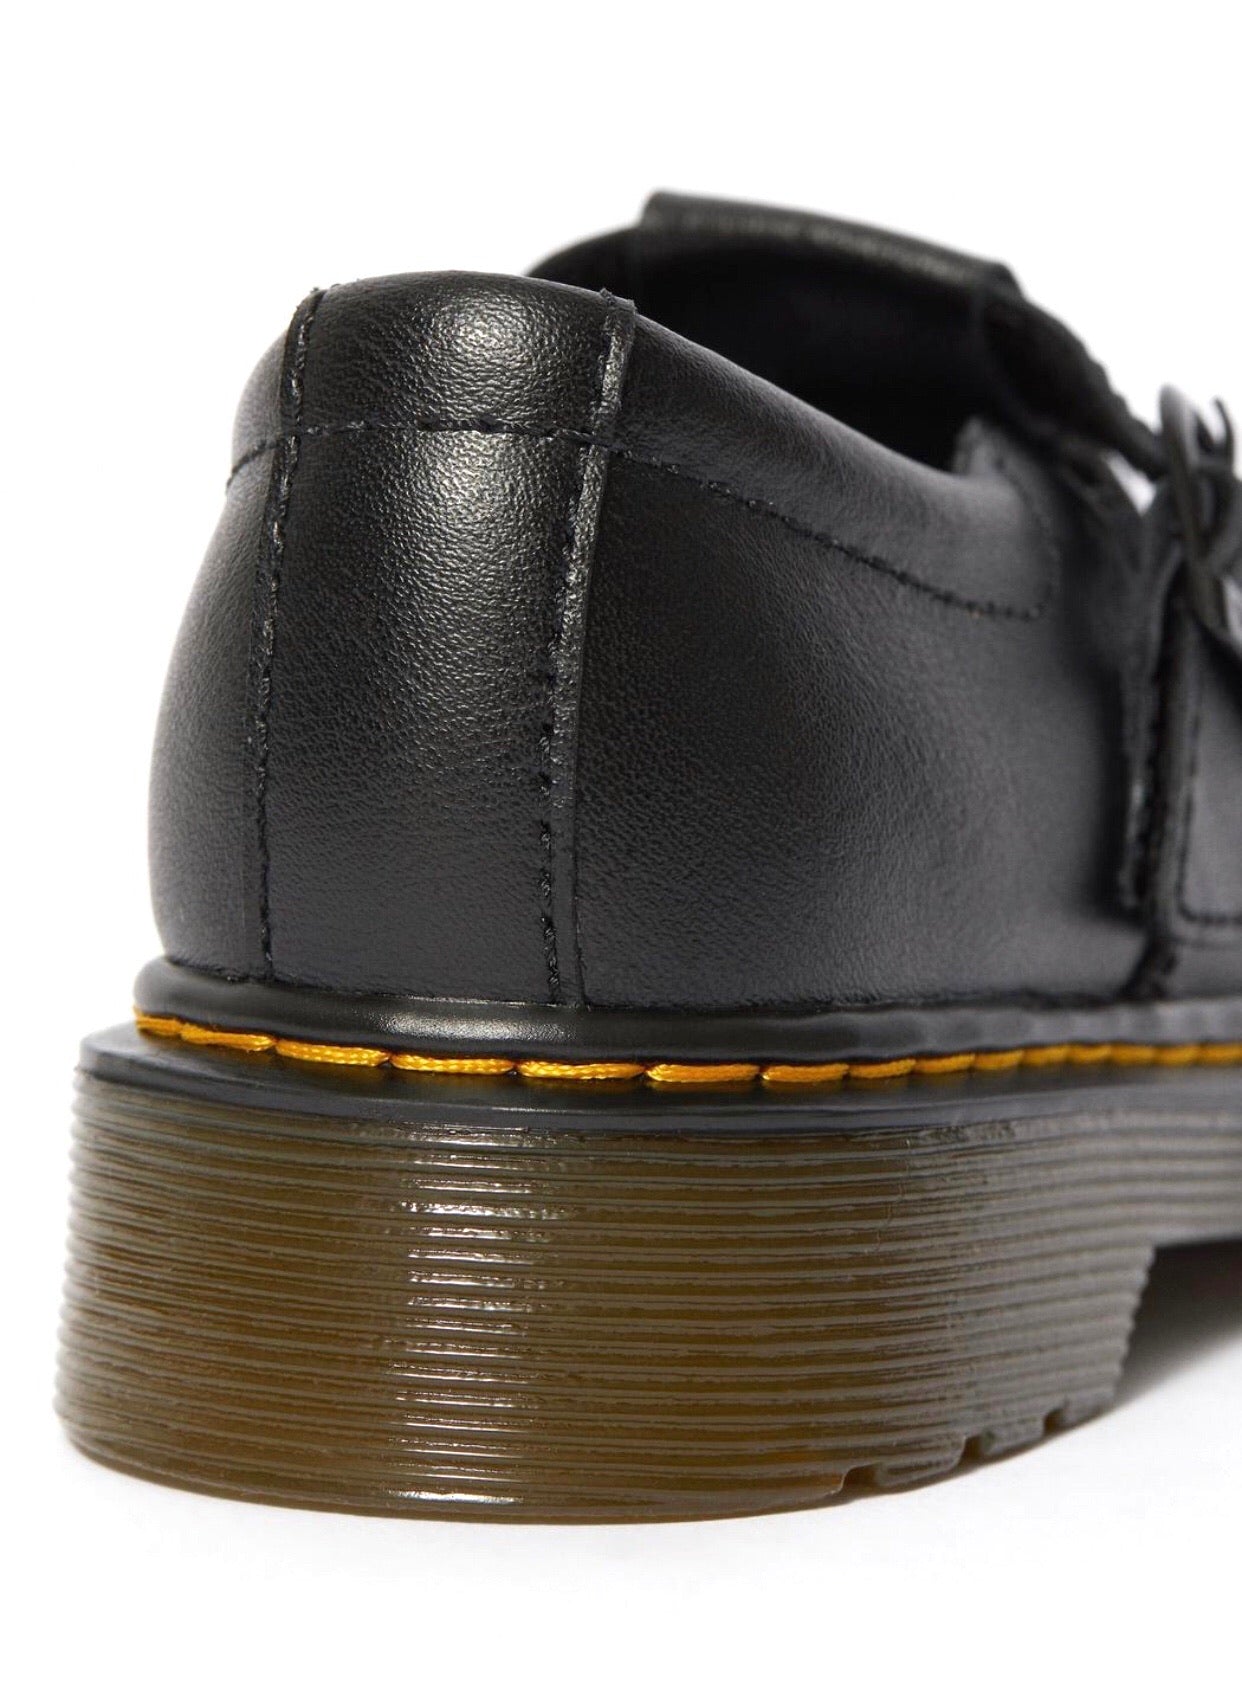 Dr. Martens Polley Black Junior Leather Mary Jane